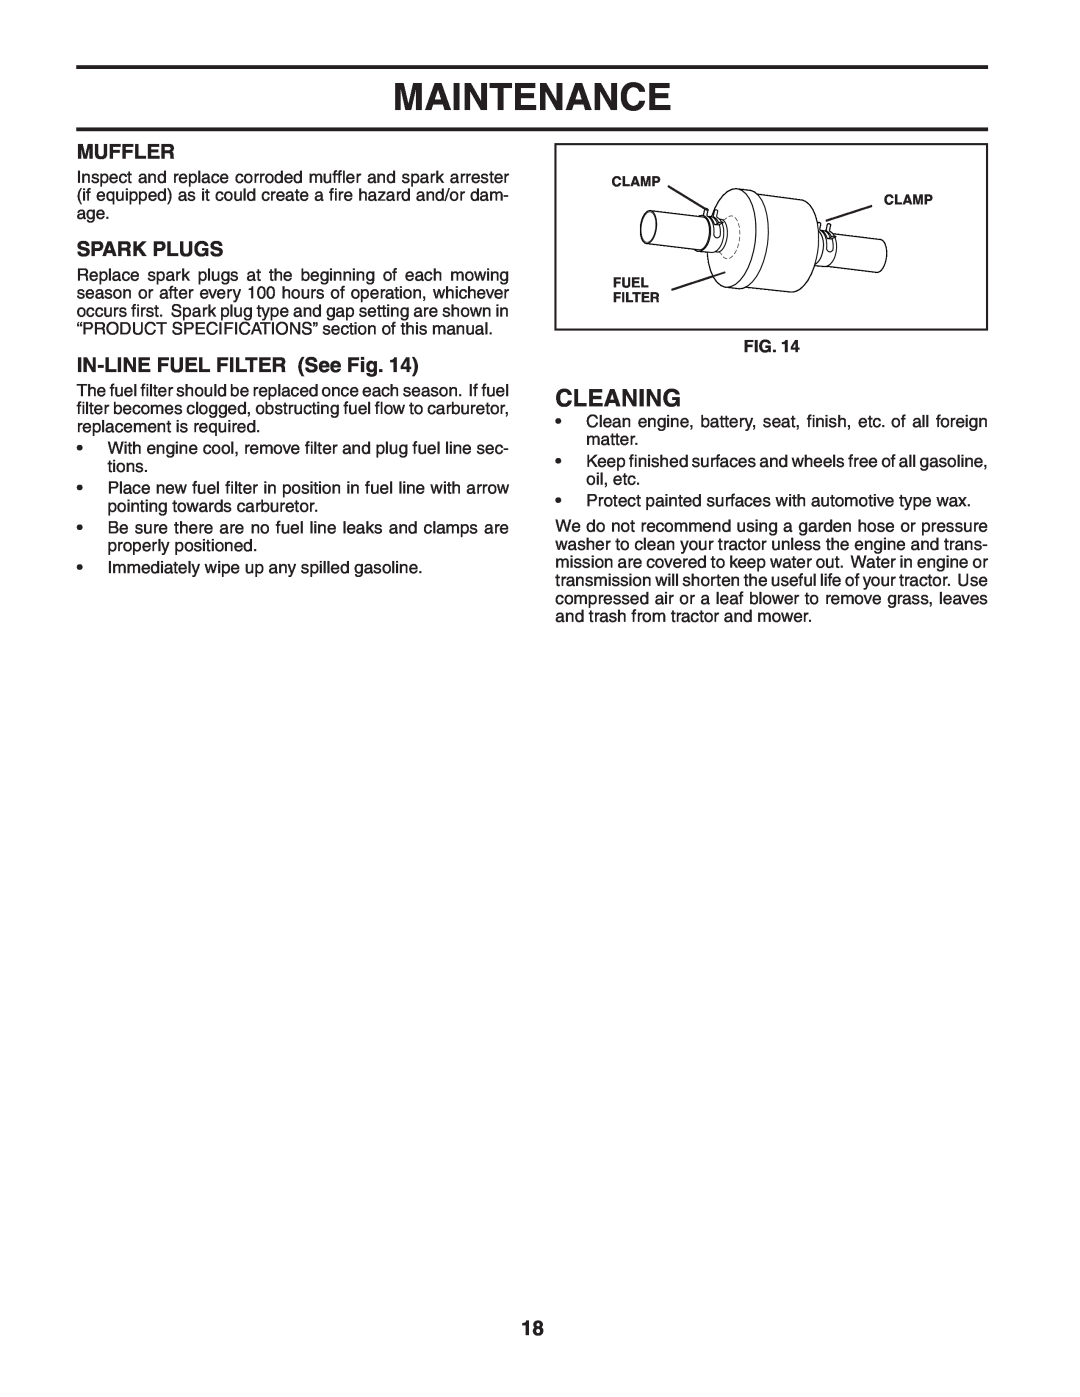 Poulan PO1538C manual Cleaning, Muffler, Spark Plugs, IN-LINE FUEL FILTER See Fig, Maintenance 